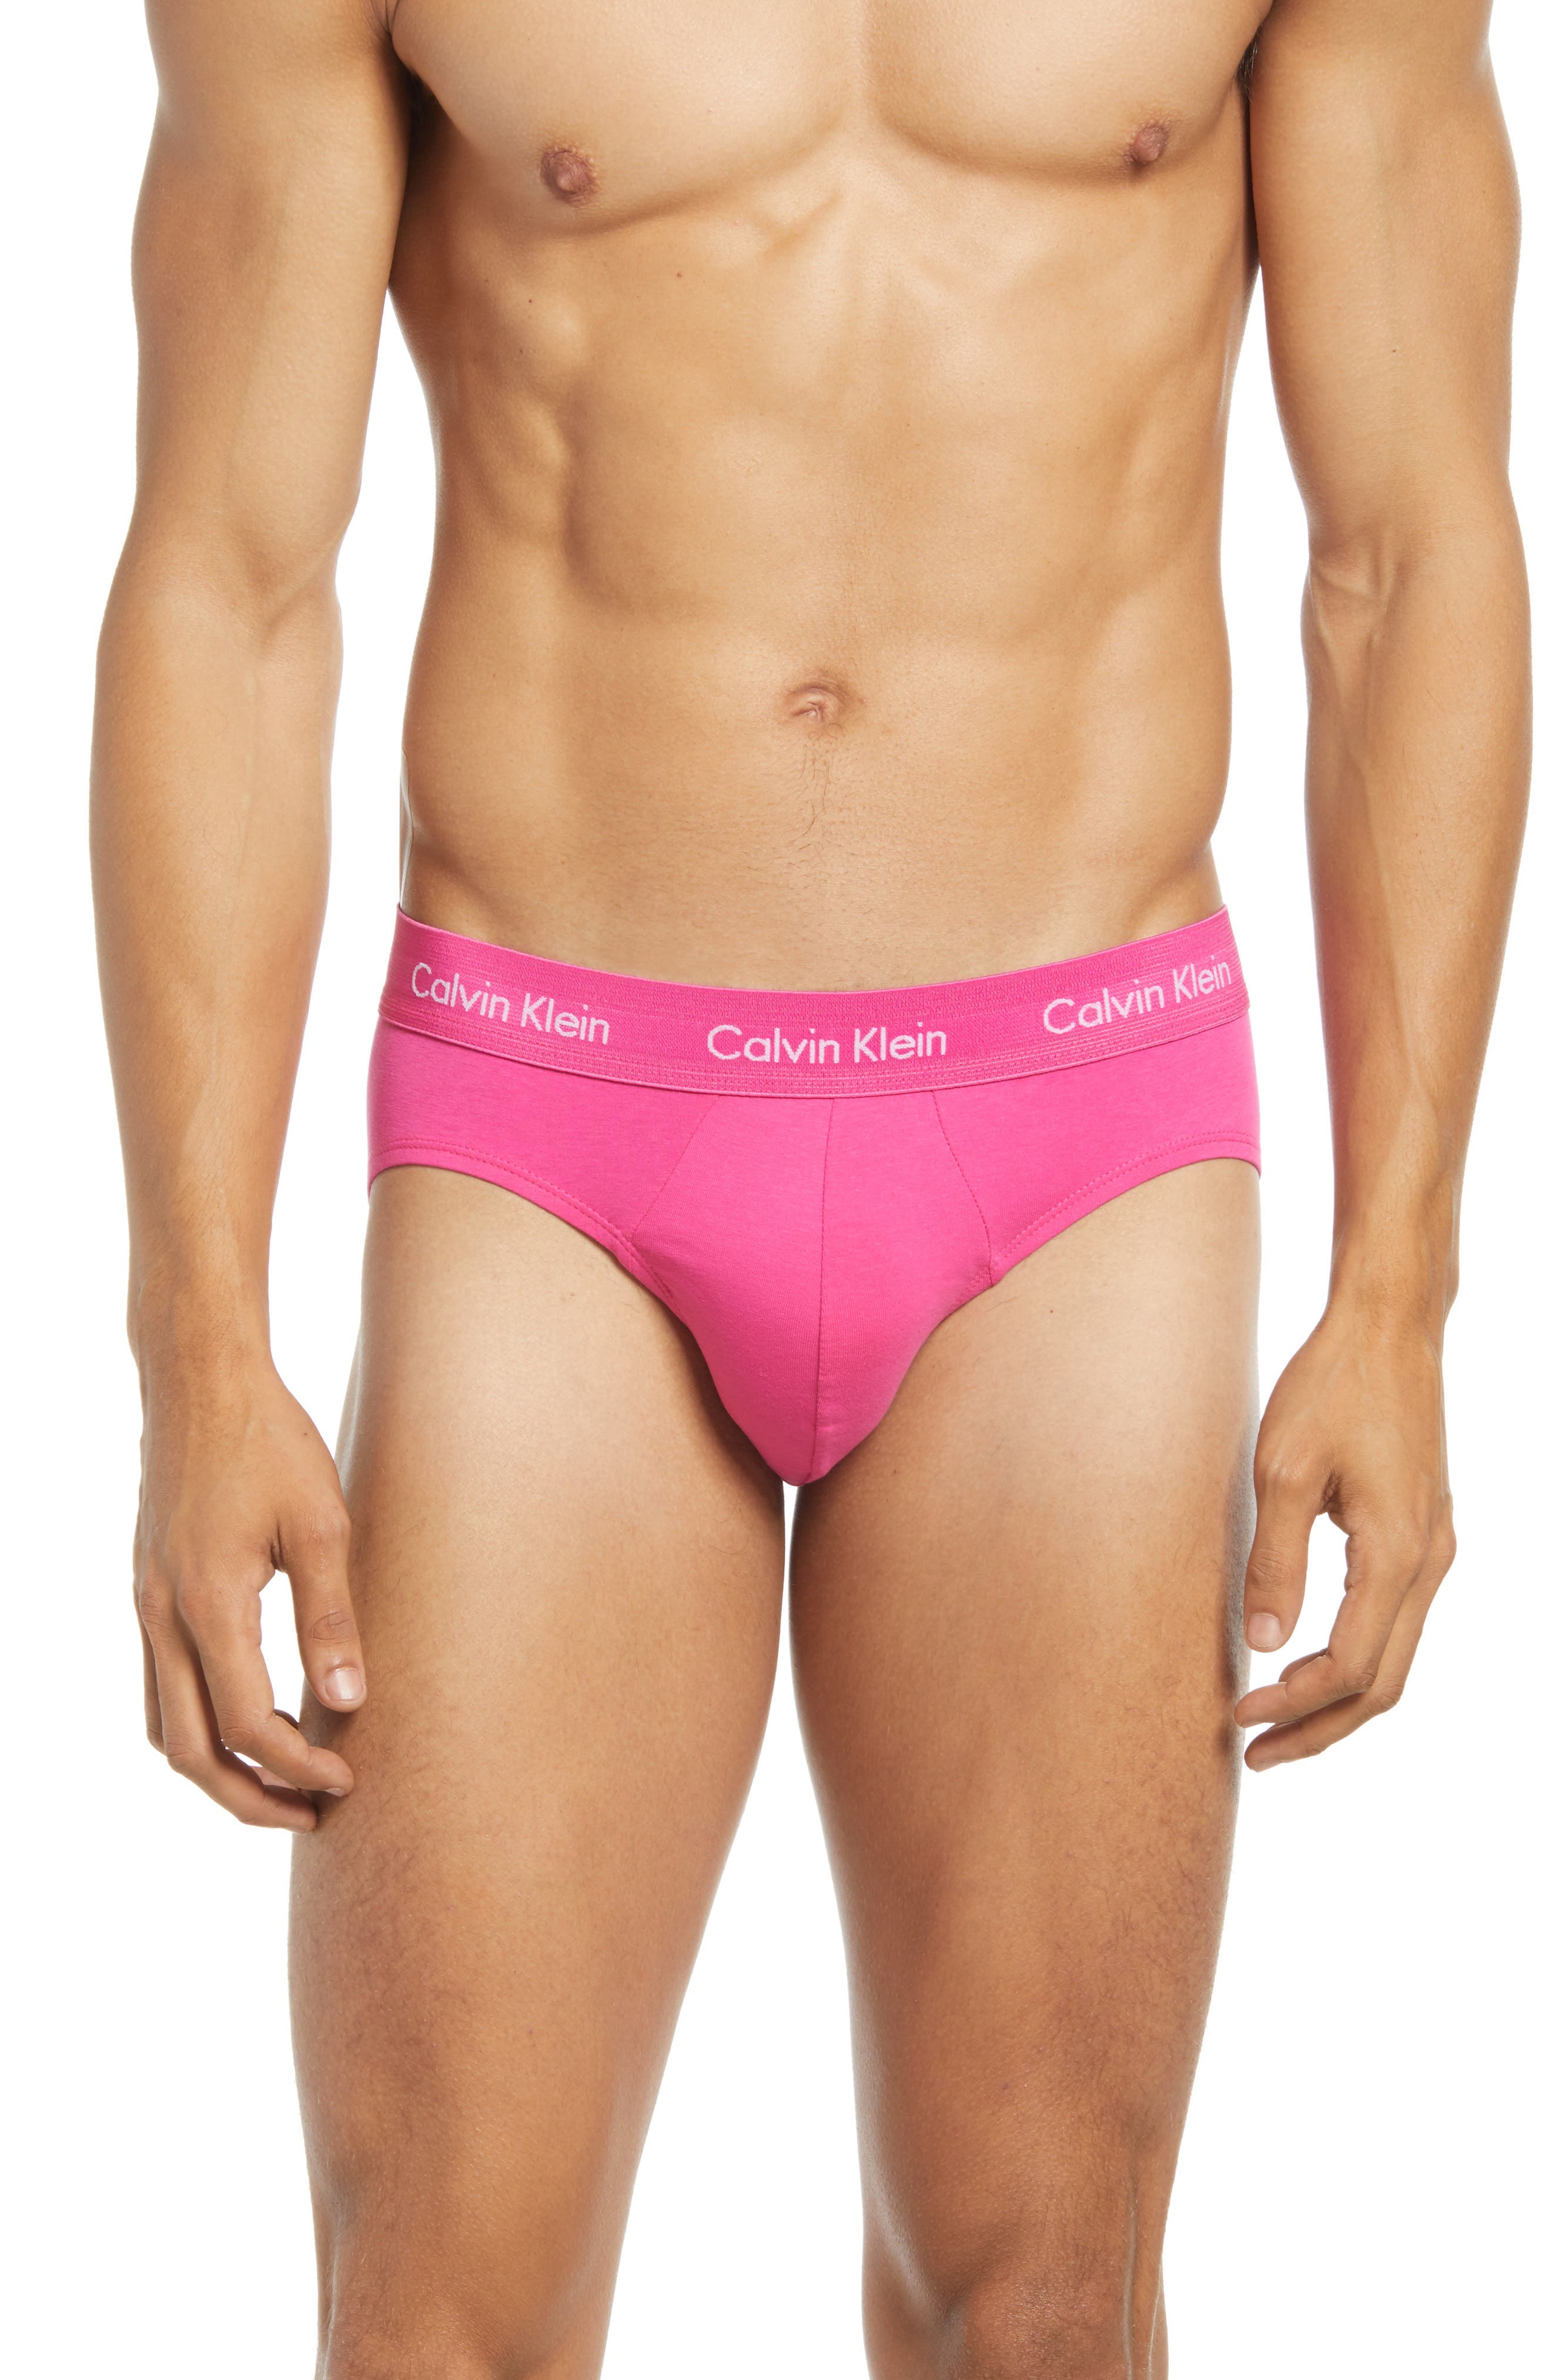 UPC 790812537725 product image for Men's Calvin Klein Assorted 5-Pack Pride Edit Briefs, Size Small - Pink | upcitemdb.com